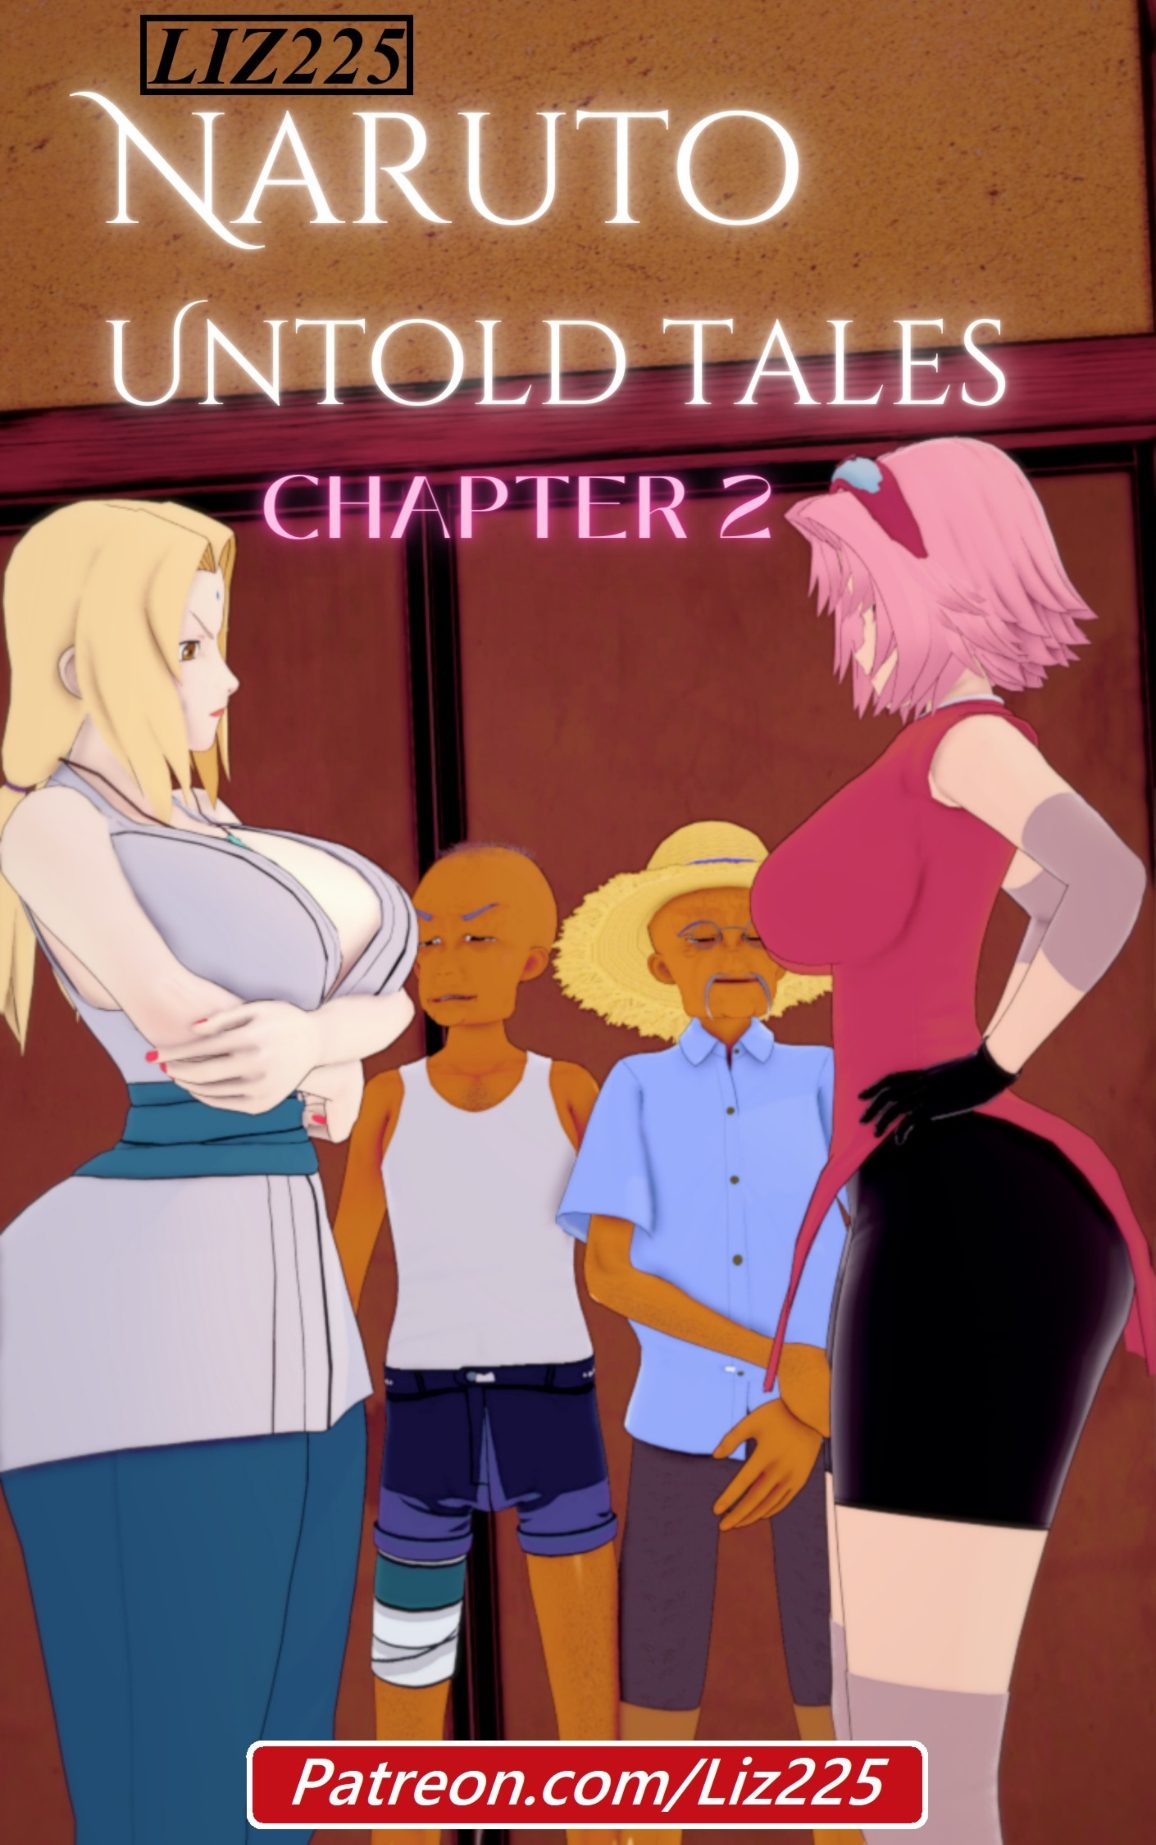 Naruto – Untold tales – Chapter 2 by LIZ225